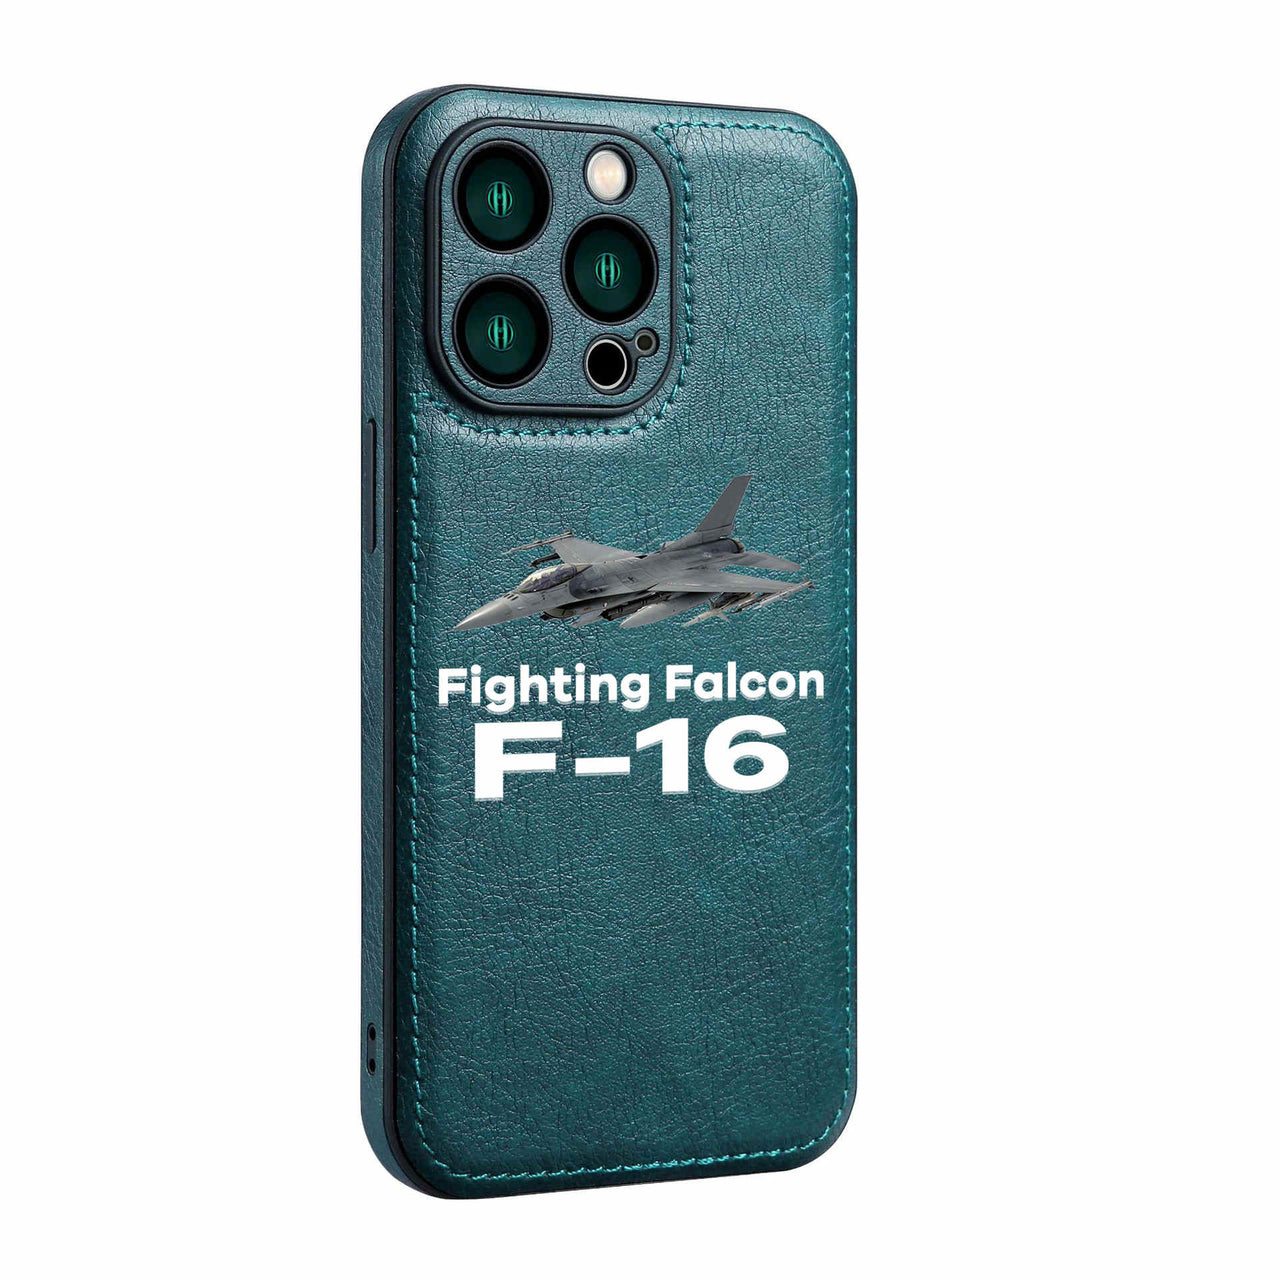 The Fighting Falcon F16 Designed Leather iPhone Cases